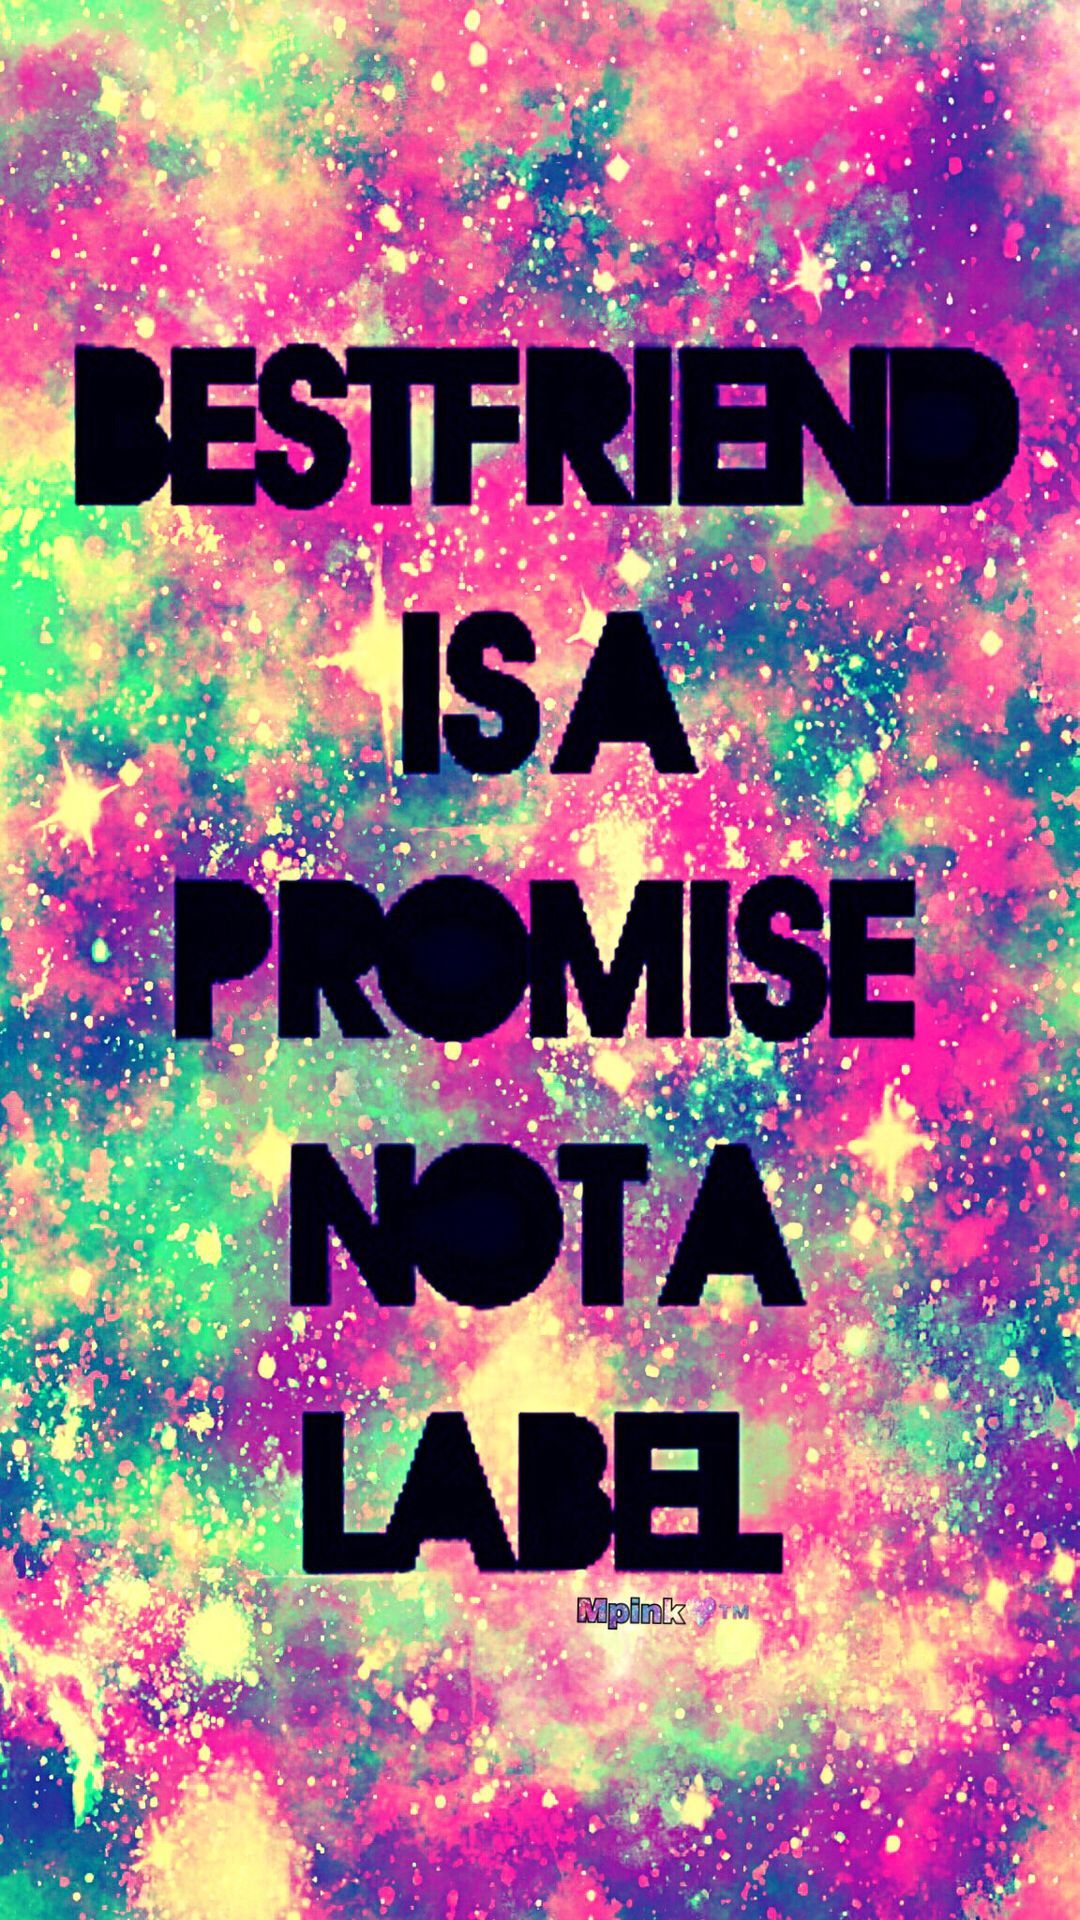 Best Friend Galaxy Wallpaper #androidwallpaper #iphonewallpaper #wallpaper #galaxy #sparkle #glitter #lockscreen #pre. Cute bff quotes, Bff quotes, Friends quotes